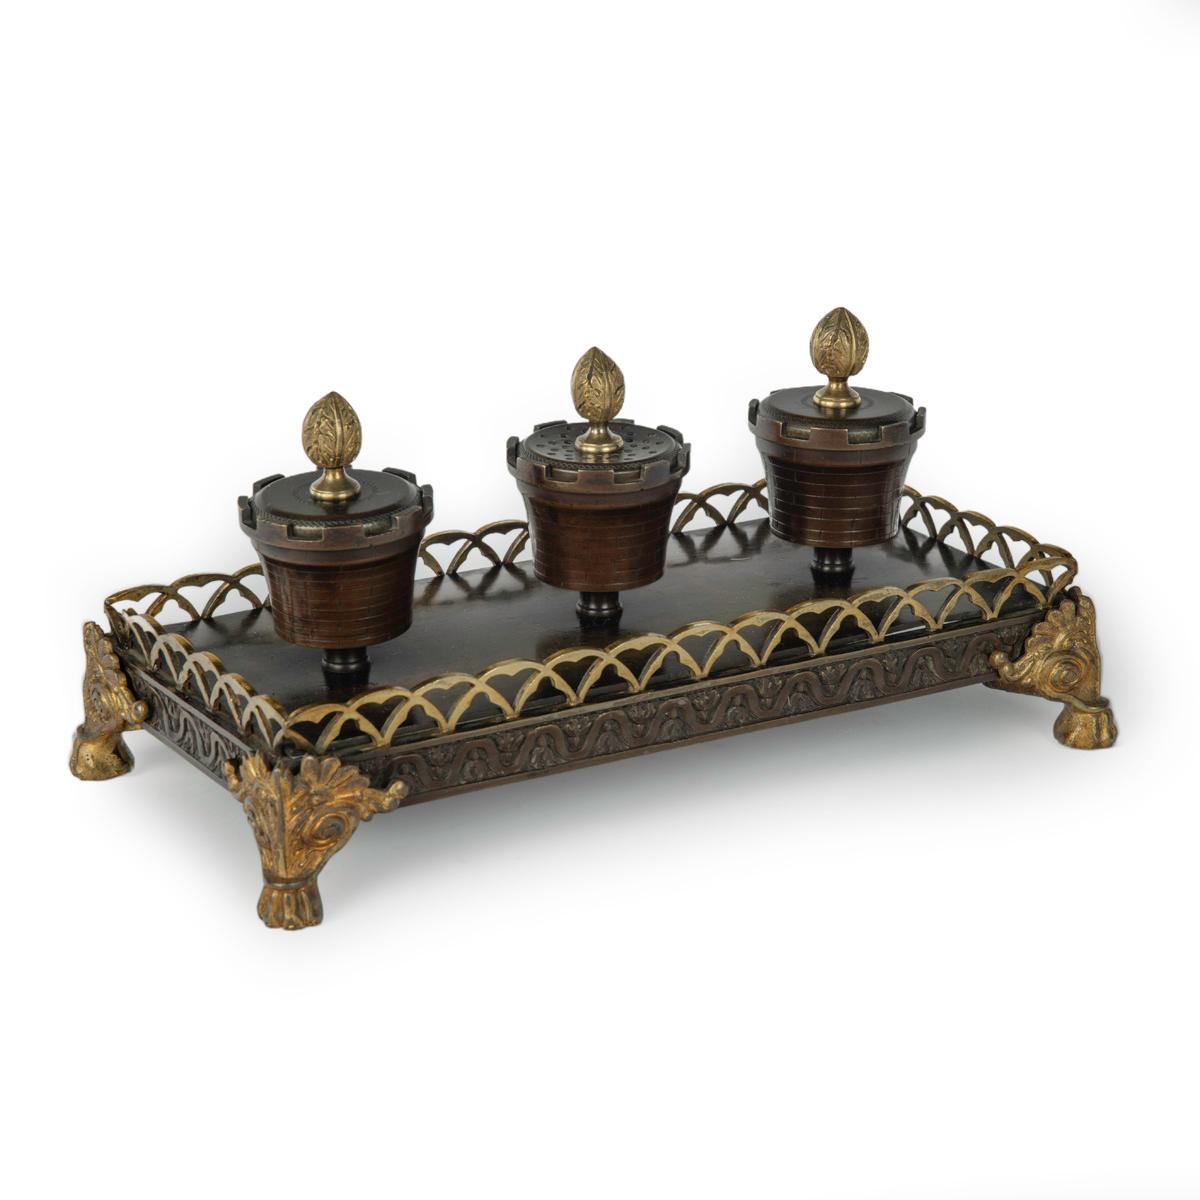 A Louis Philippe bronze and ormolu desk set, comprising two ink wells and a powder shaker in the form of crenelated urns with anthemion-bud finials, all set on a rectangular base with a  gallery and applied anthemion scroll and paw feet.  French,